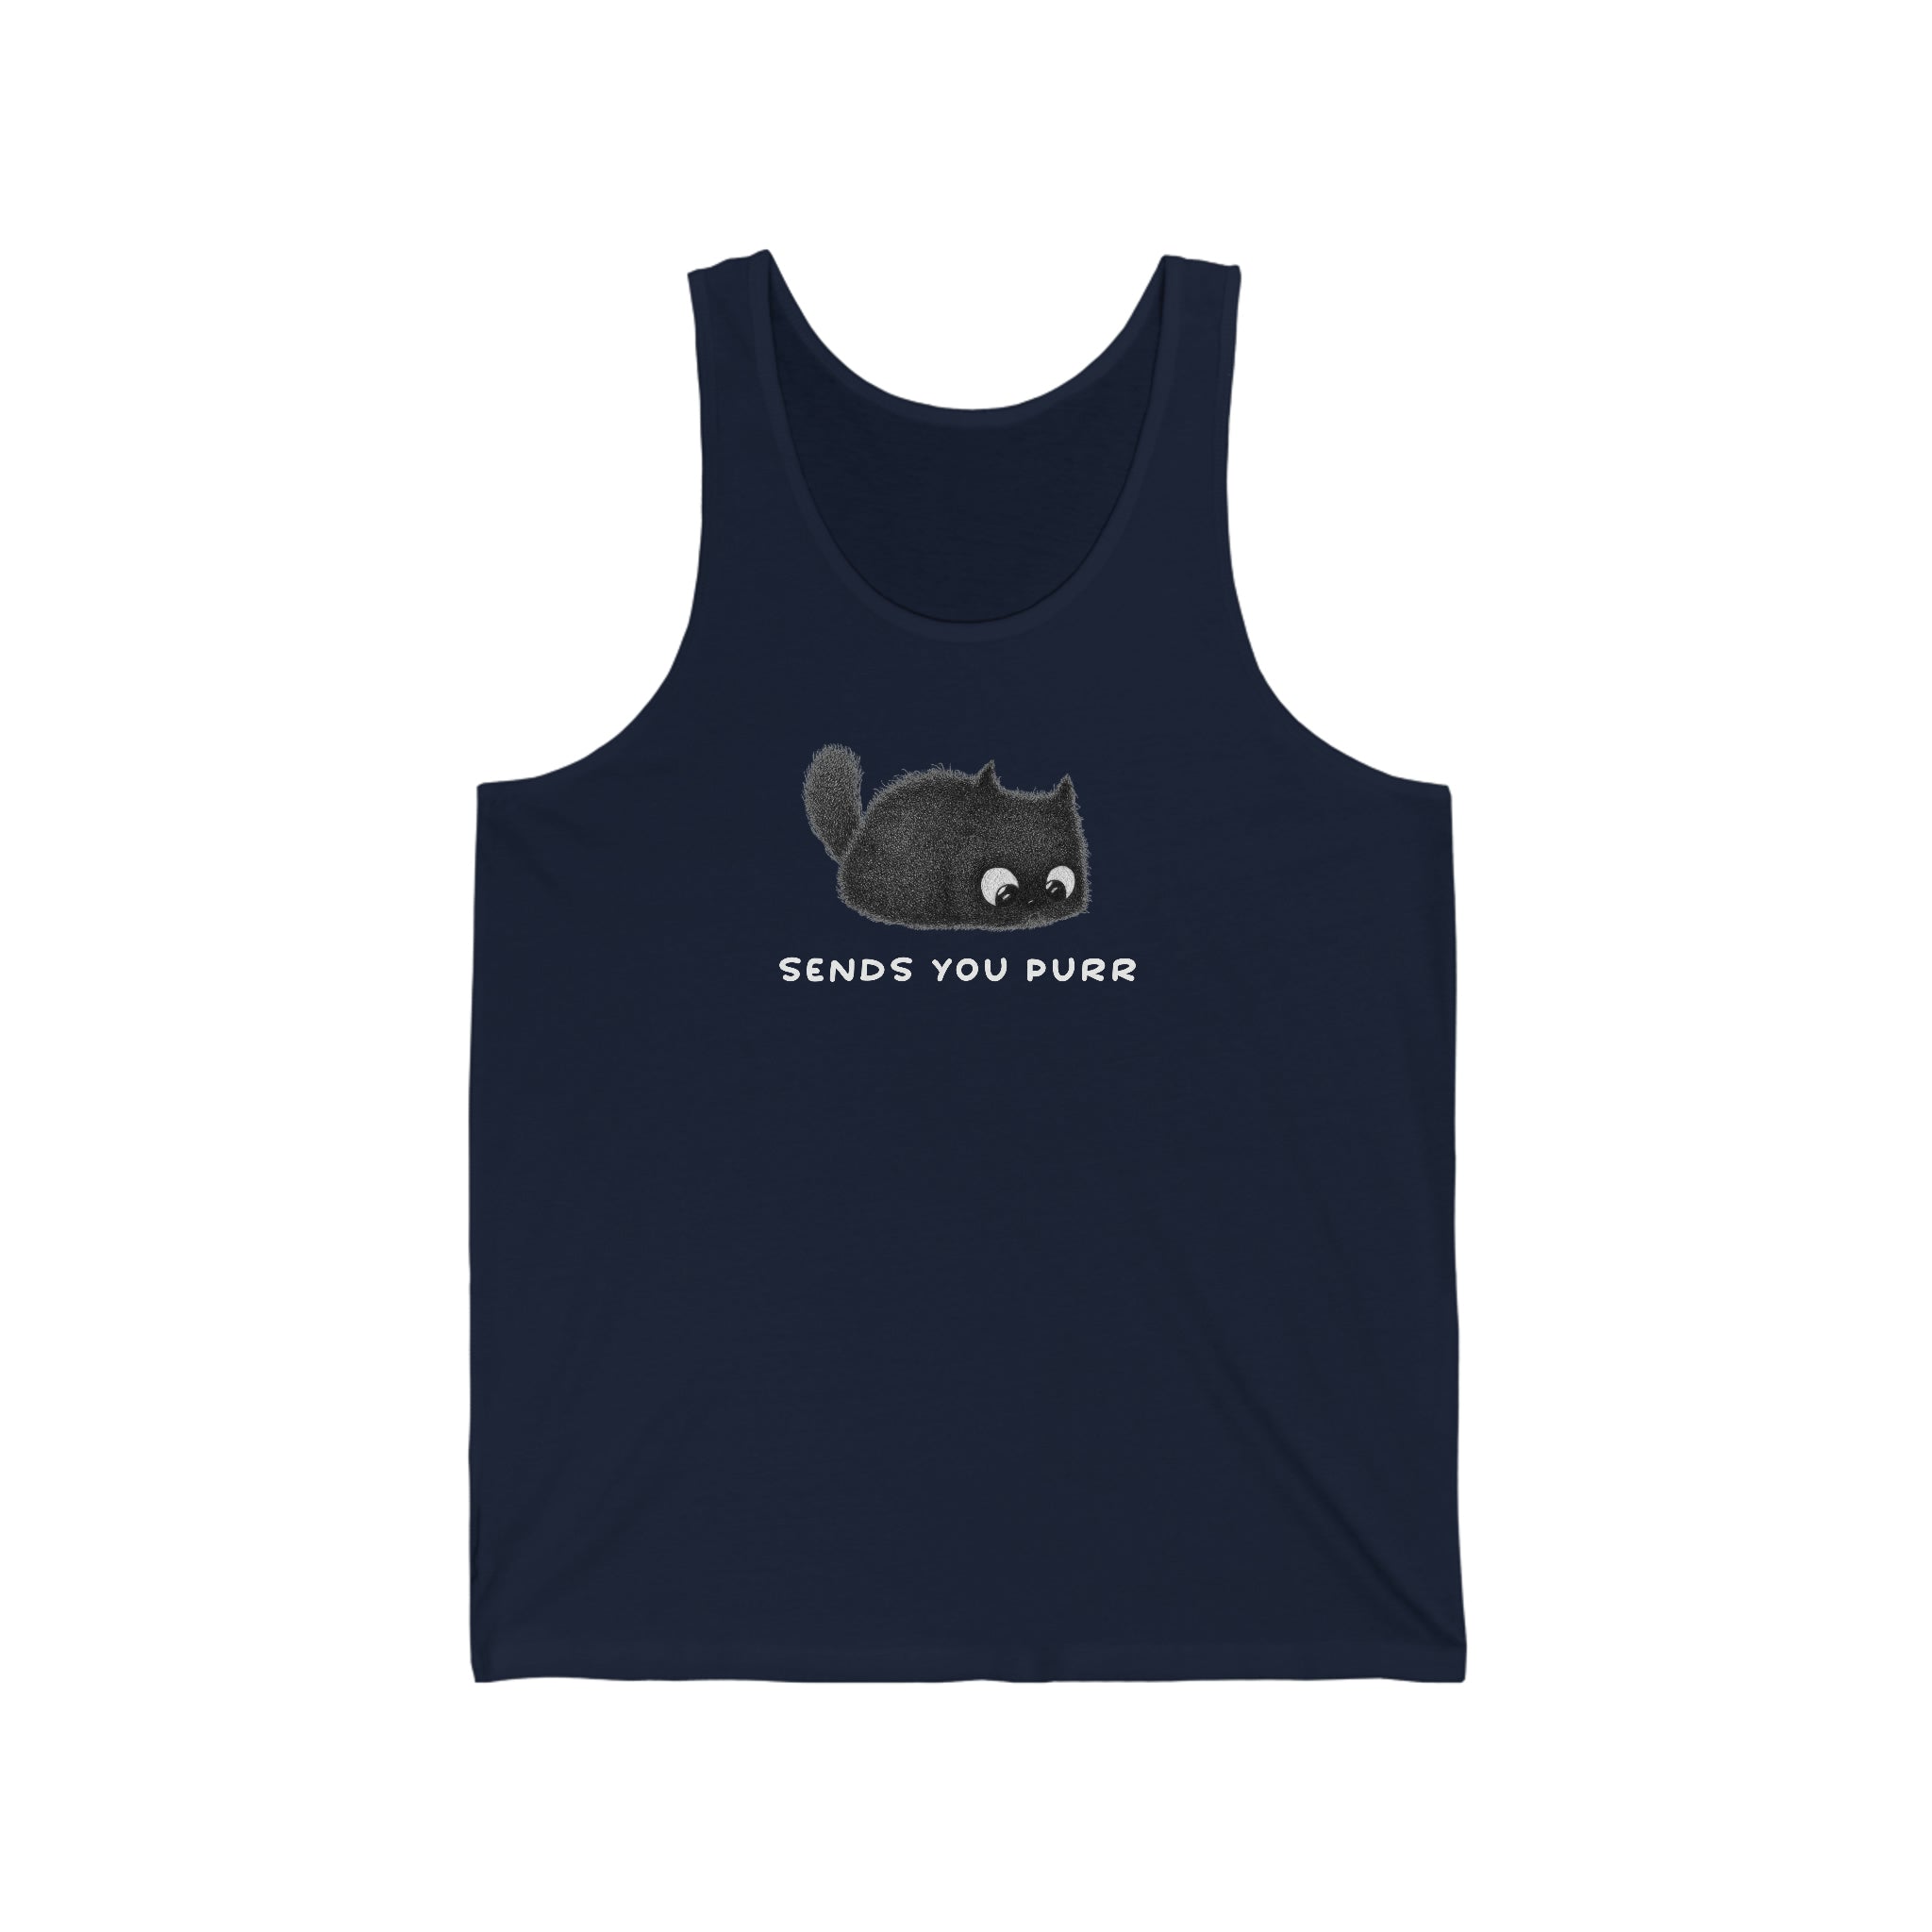 Send You Purr : Unisex 100% Cotton Tank Top by Wholesomememes & Purr In Ink